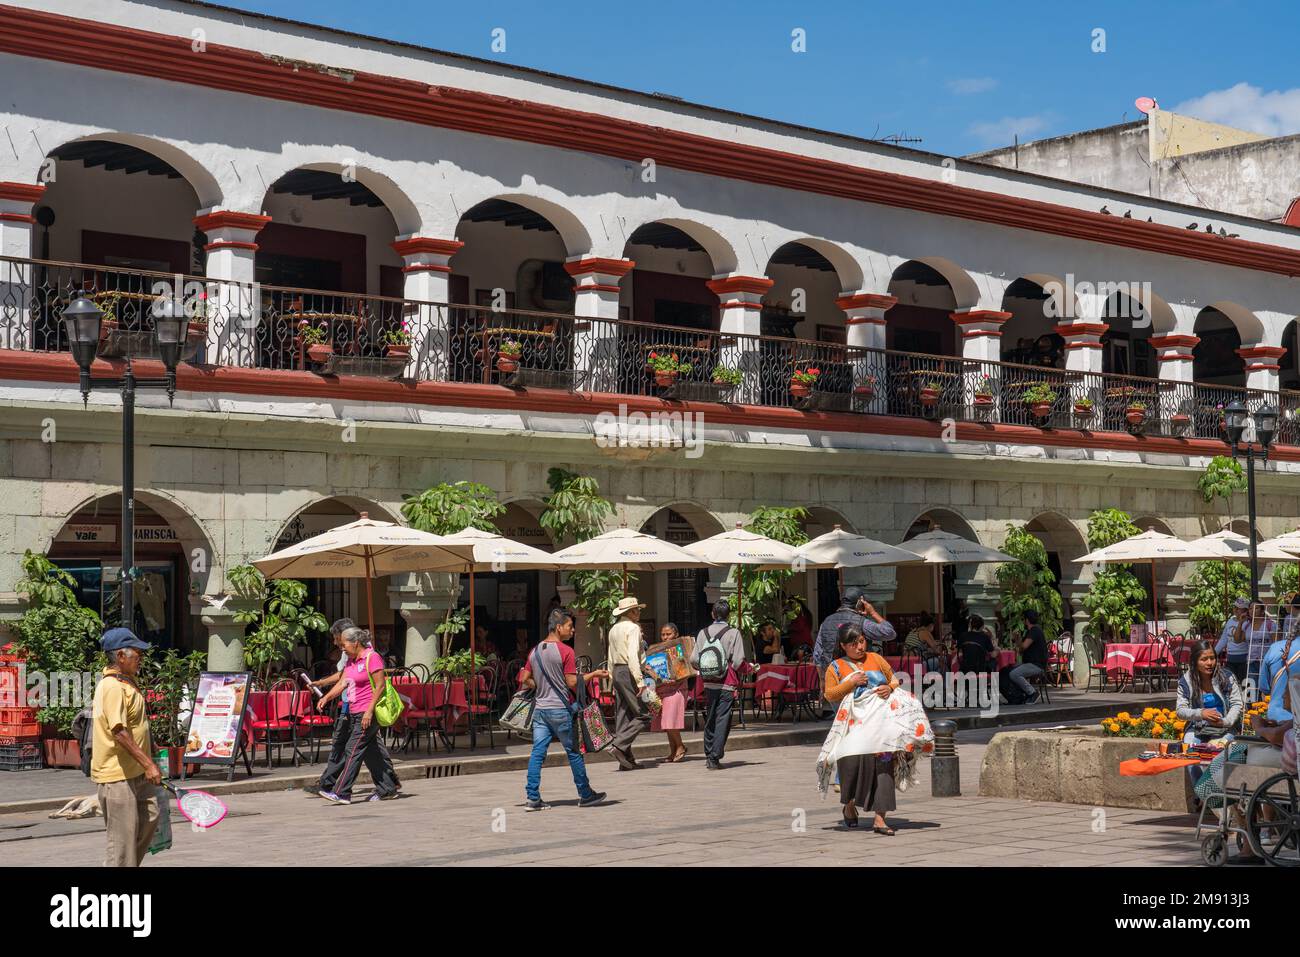 An historic building on the Zocalo or Main Square in the center of Oaxaca, Mexico.  A UNESCO World Heritage Site. Stock Photo